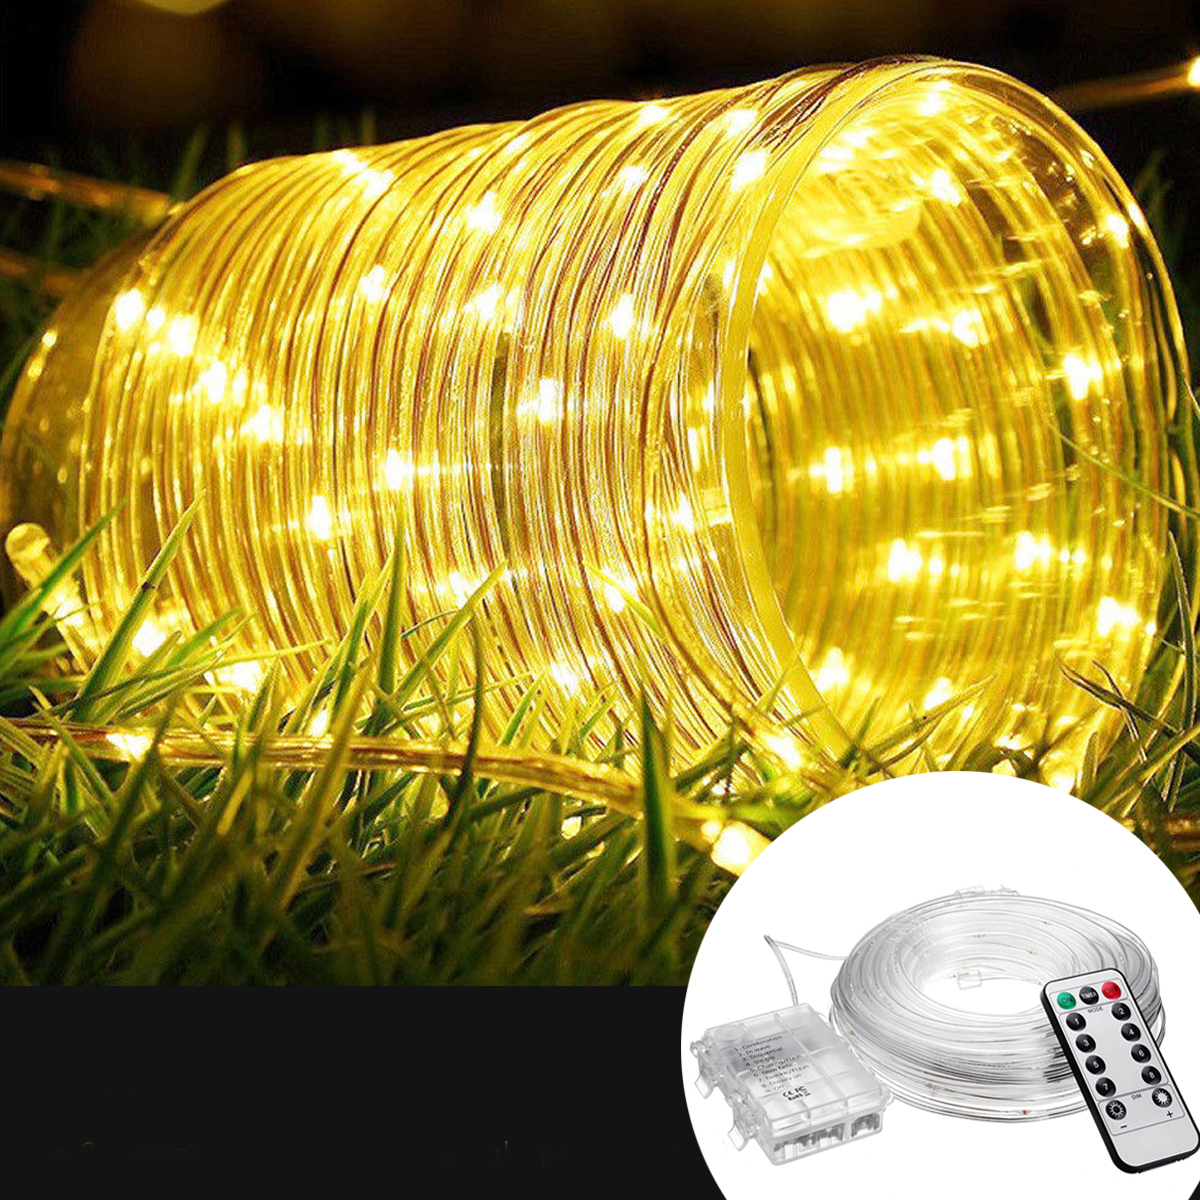 

12M Battery Powered 120LED String Light 8 Modes Remote Control Fairy Lamp Party Christmas Home Decor